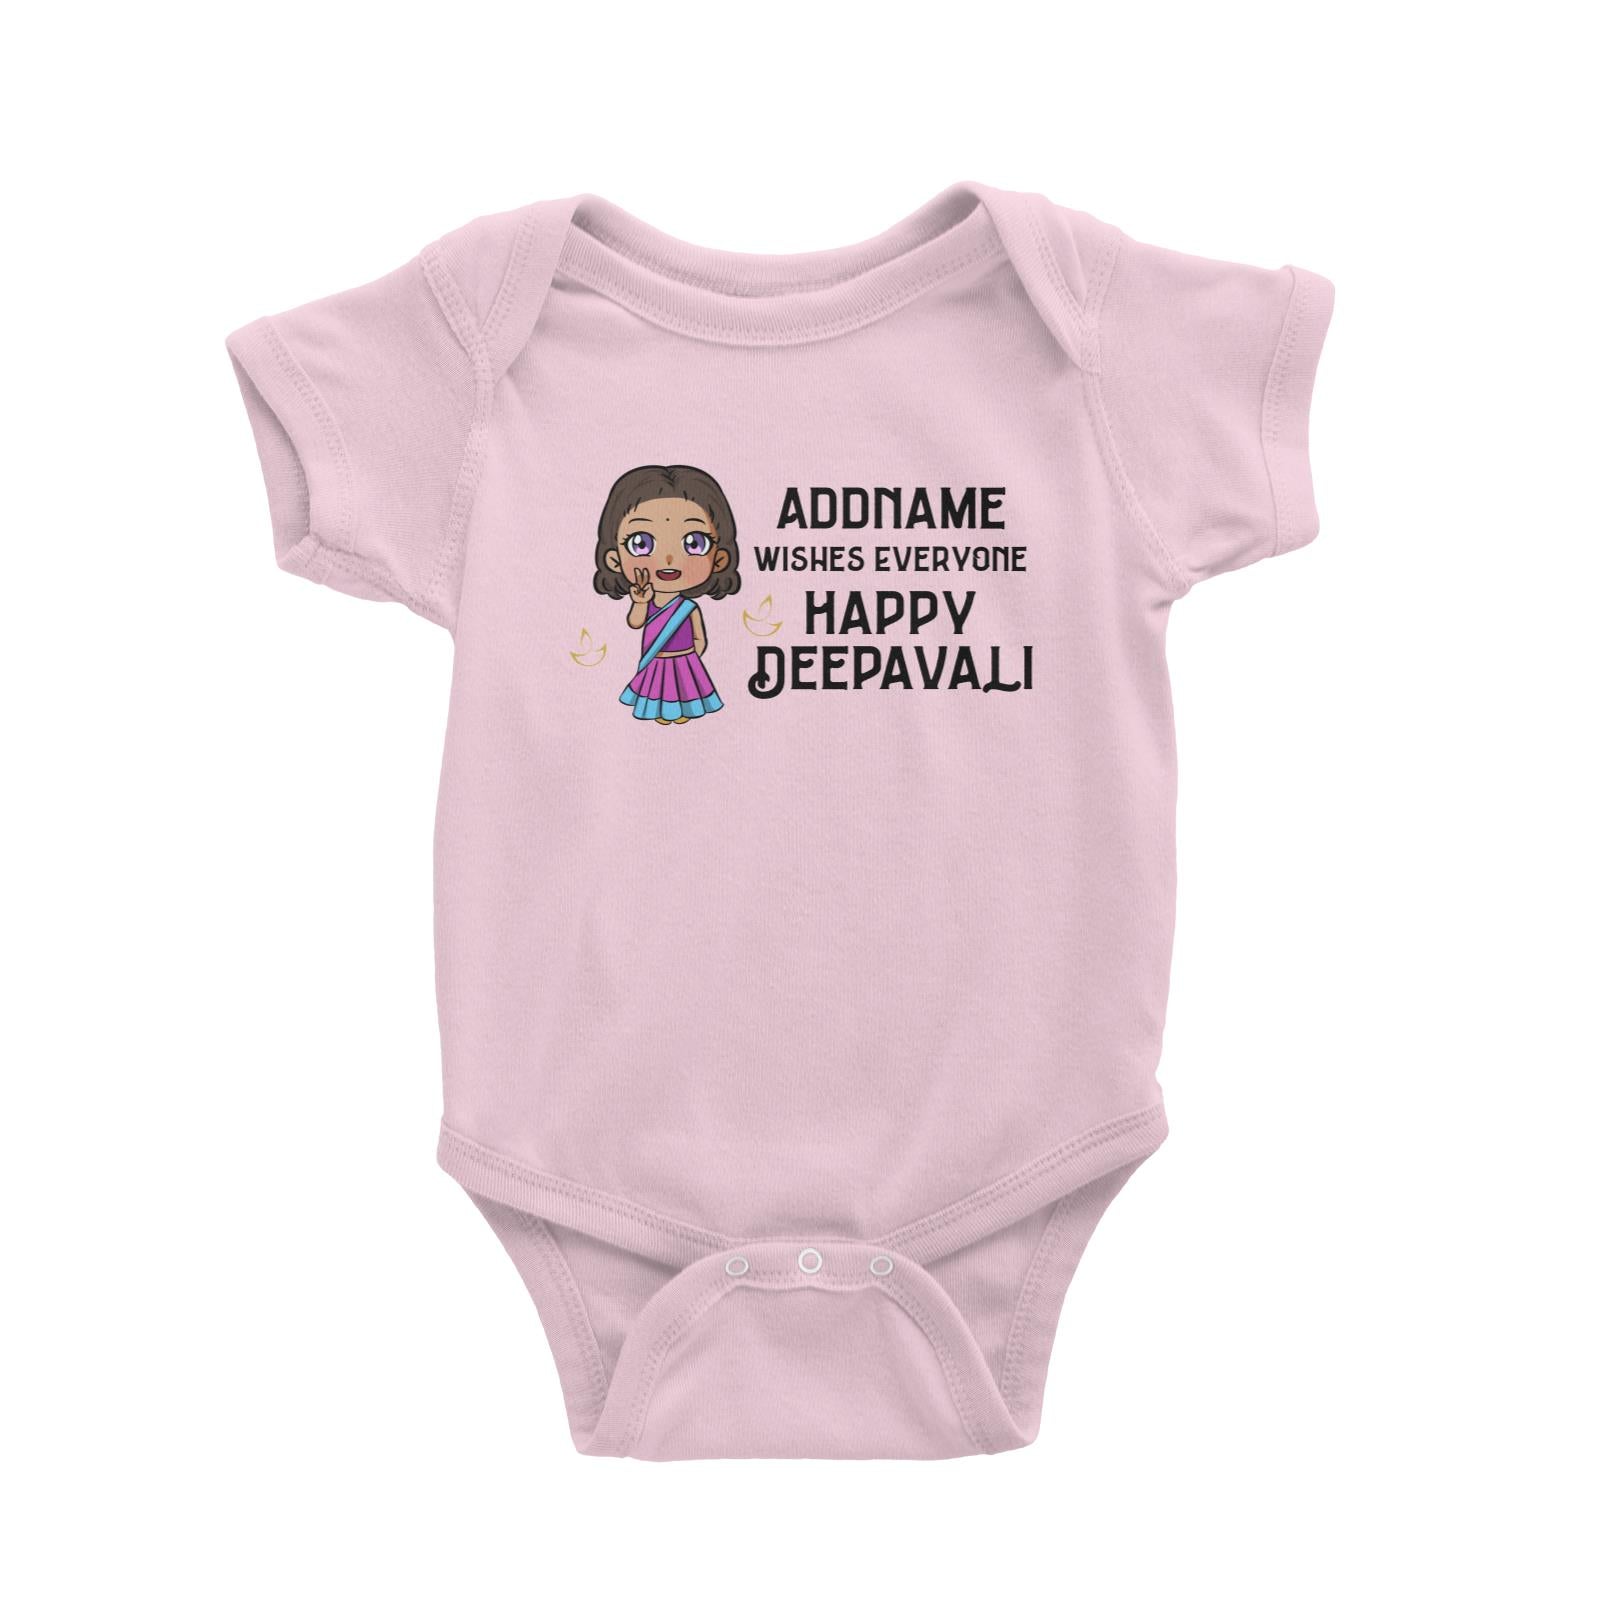 Deepavali Chibi Little Girl Front Addname Wishes Everyone Deepavali Baby Romper